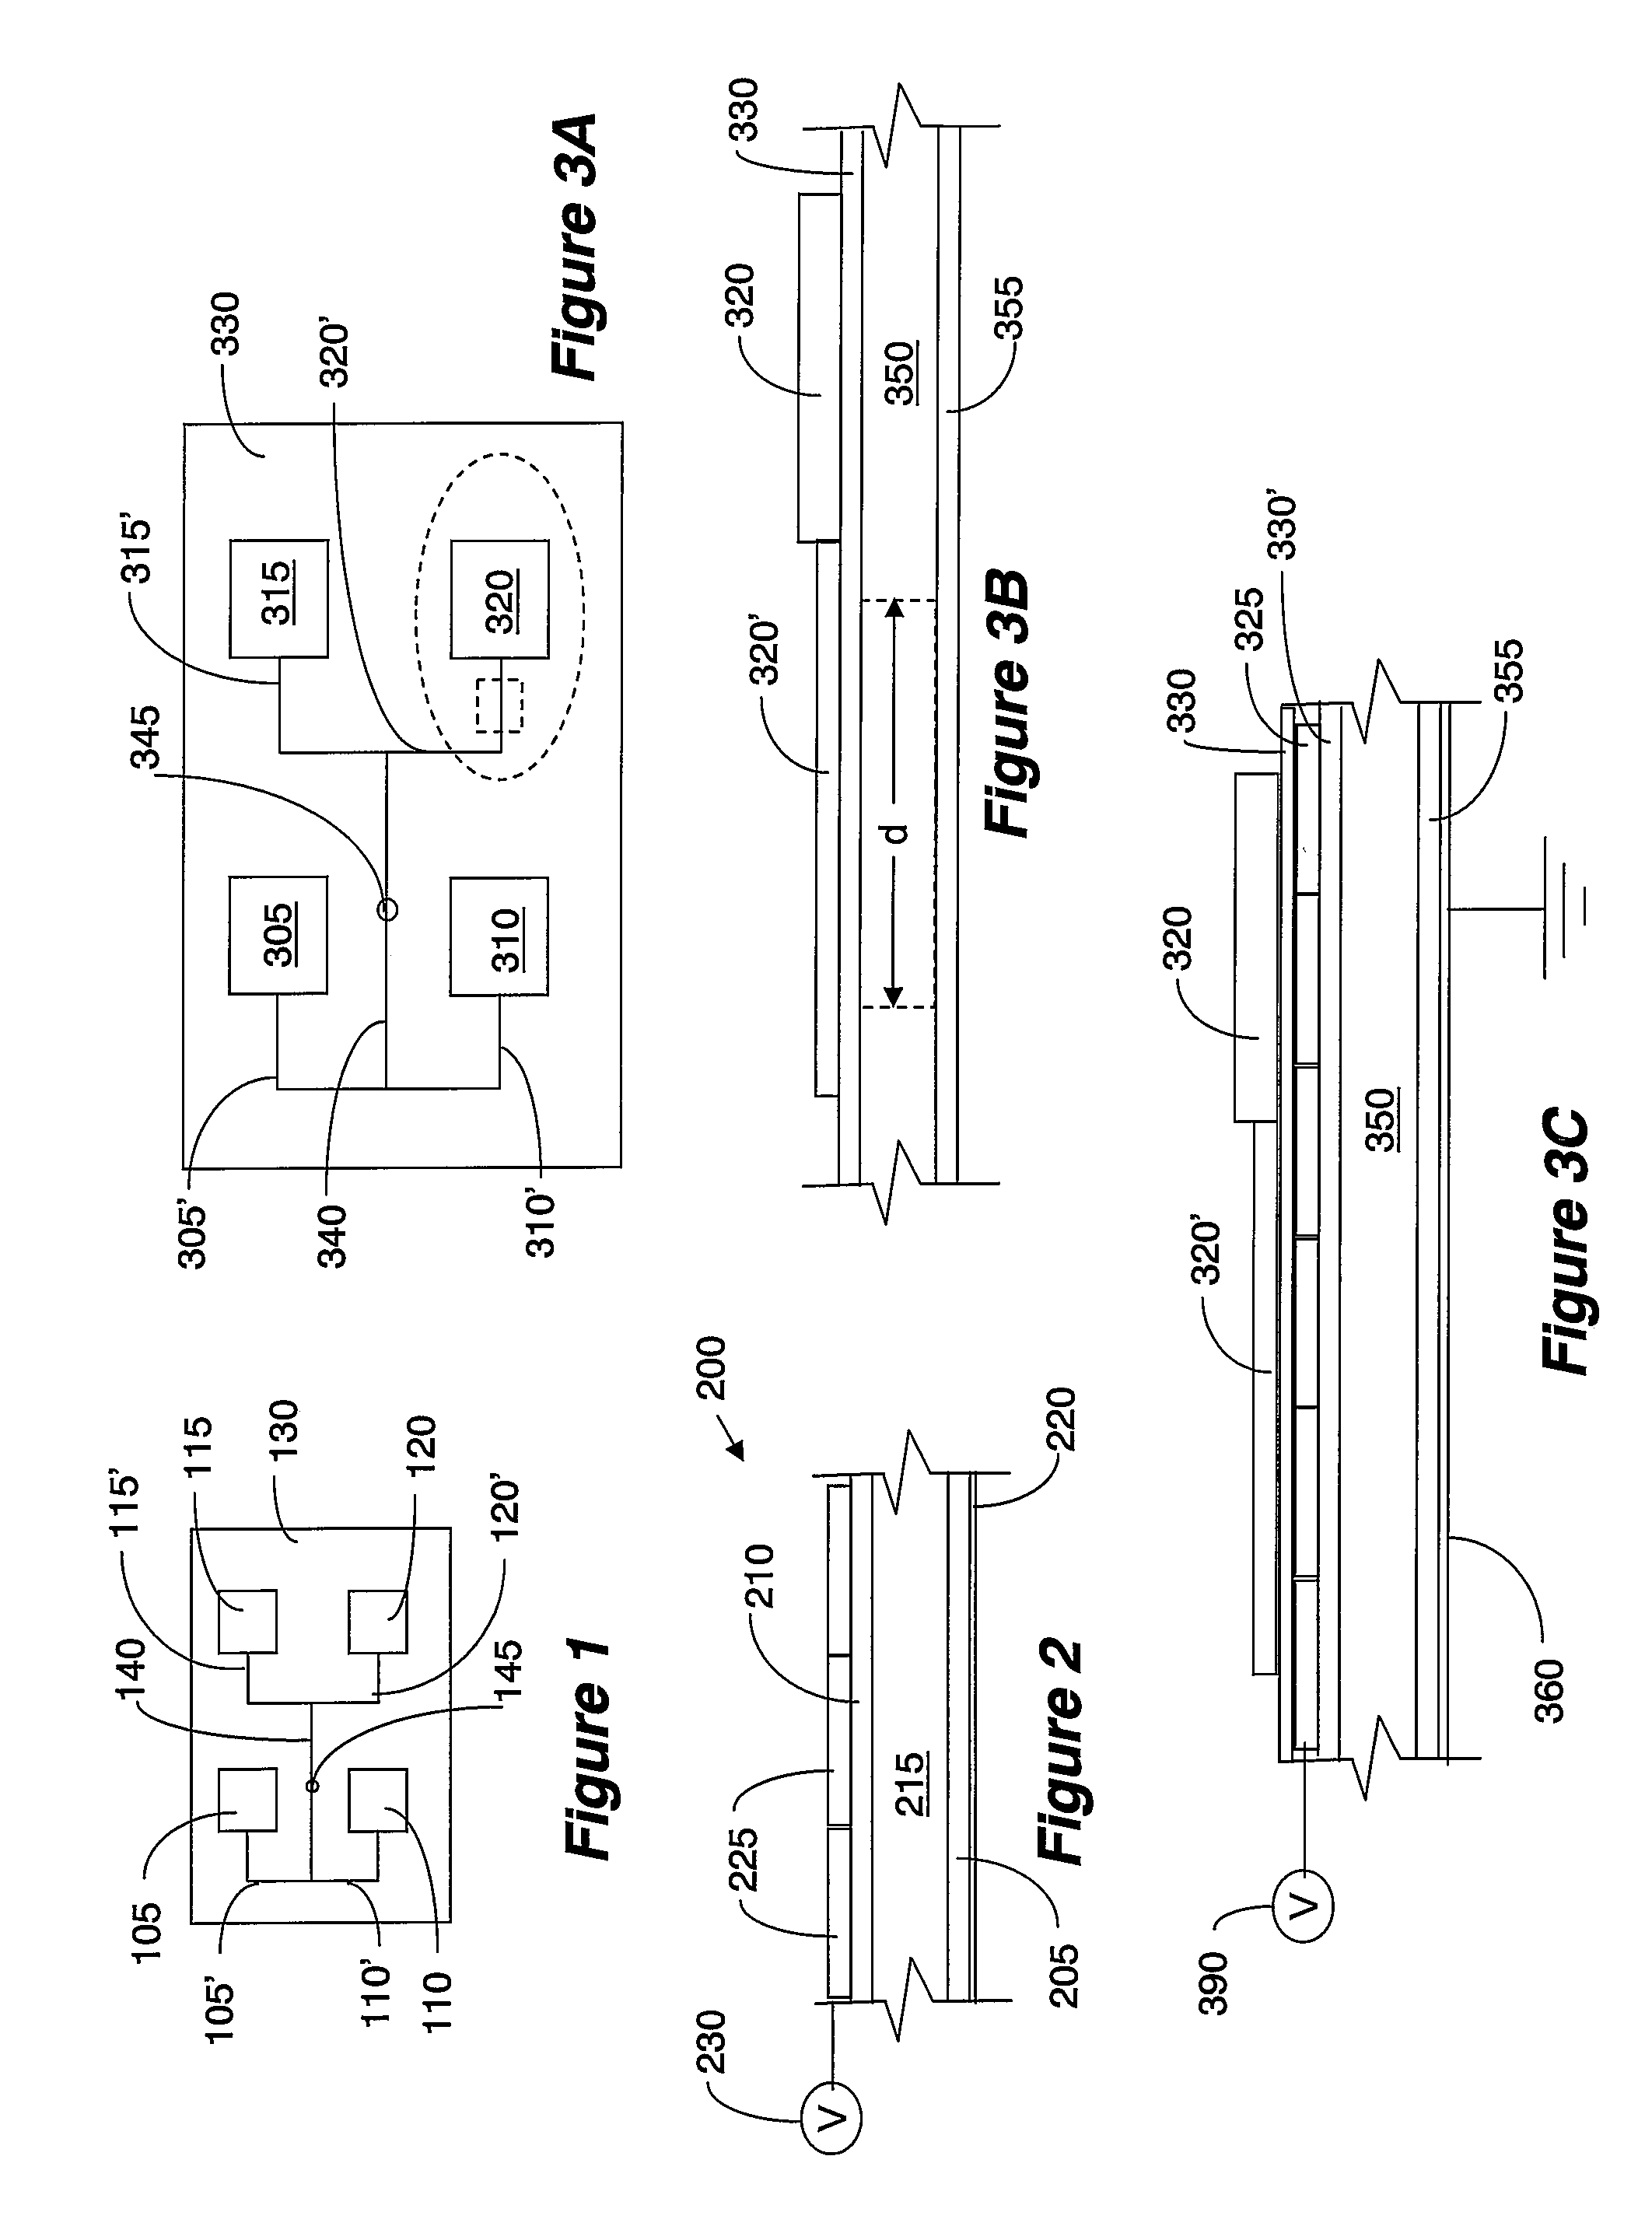 Variable dielectric constant-based antenna and array